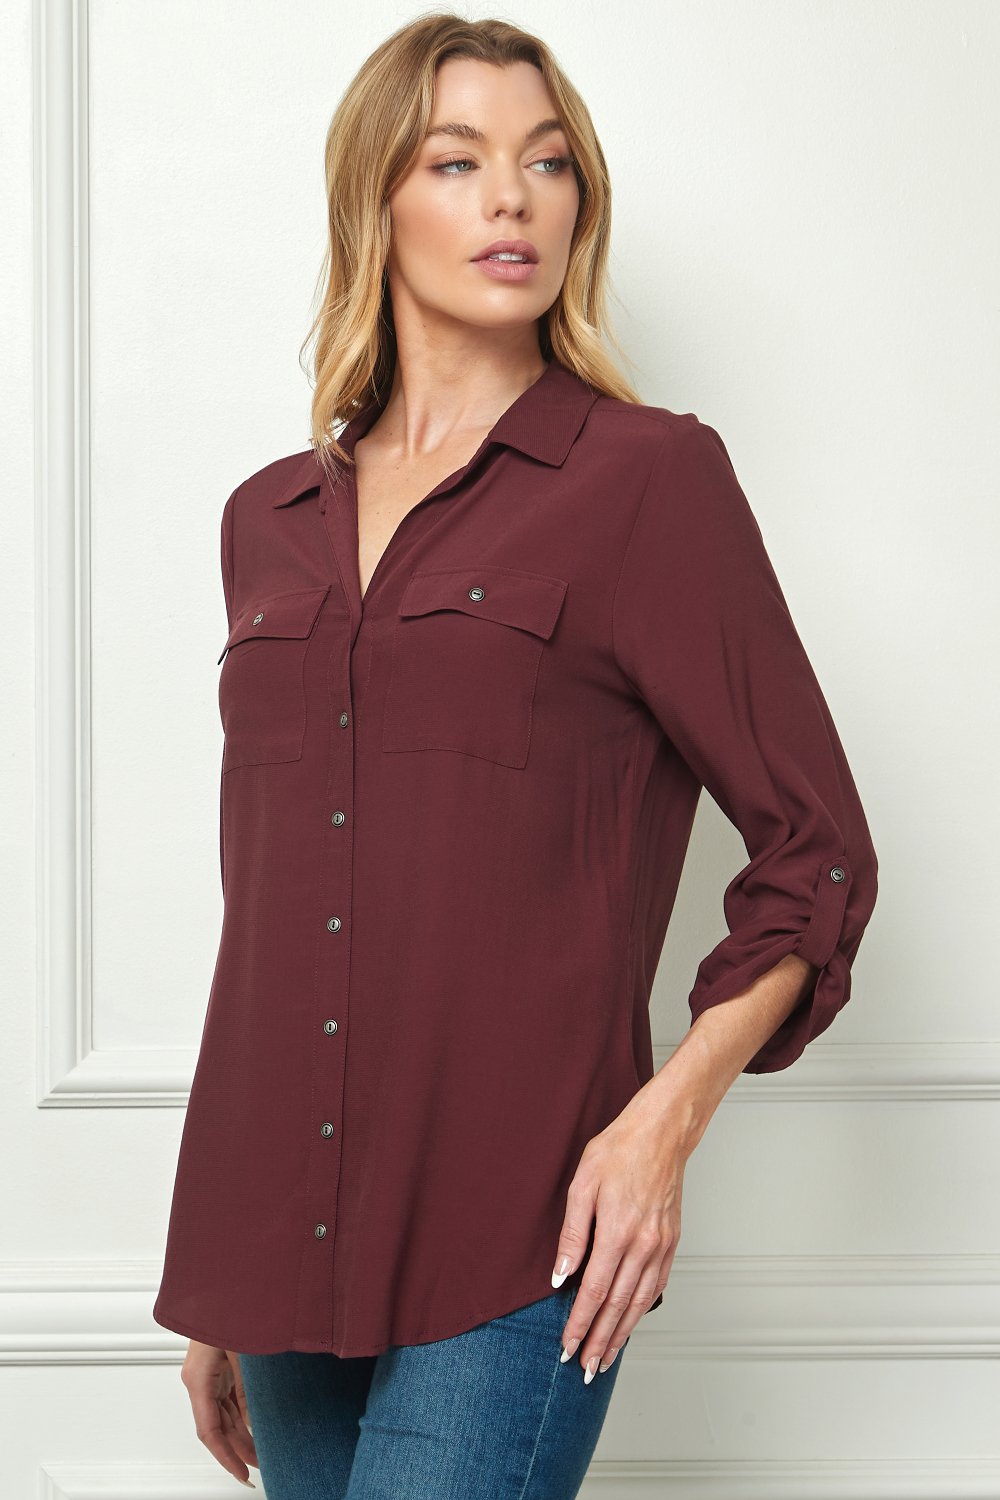 Sara Michelle 3/4 Sleeve Patch Pockets Button Front Johnny Collar Top - DressbarnShirts & Blouses